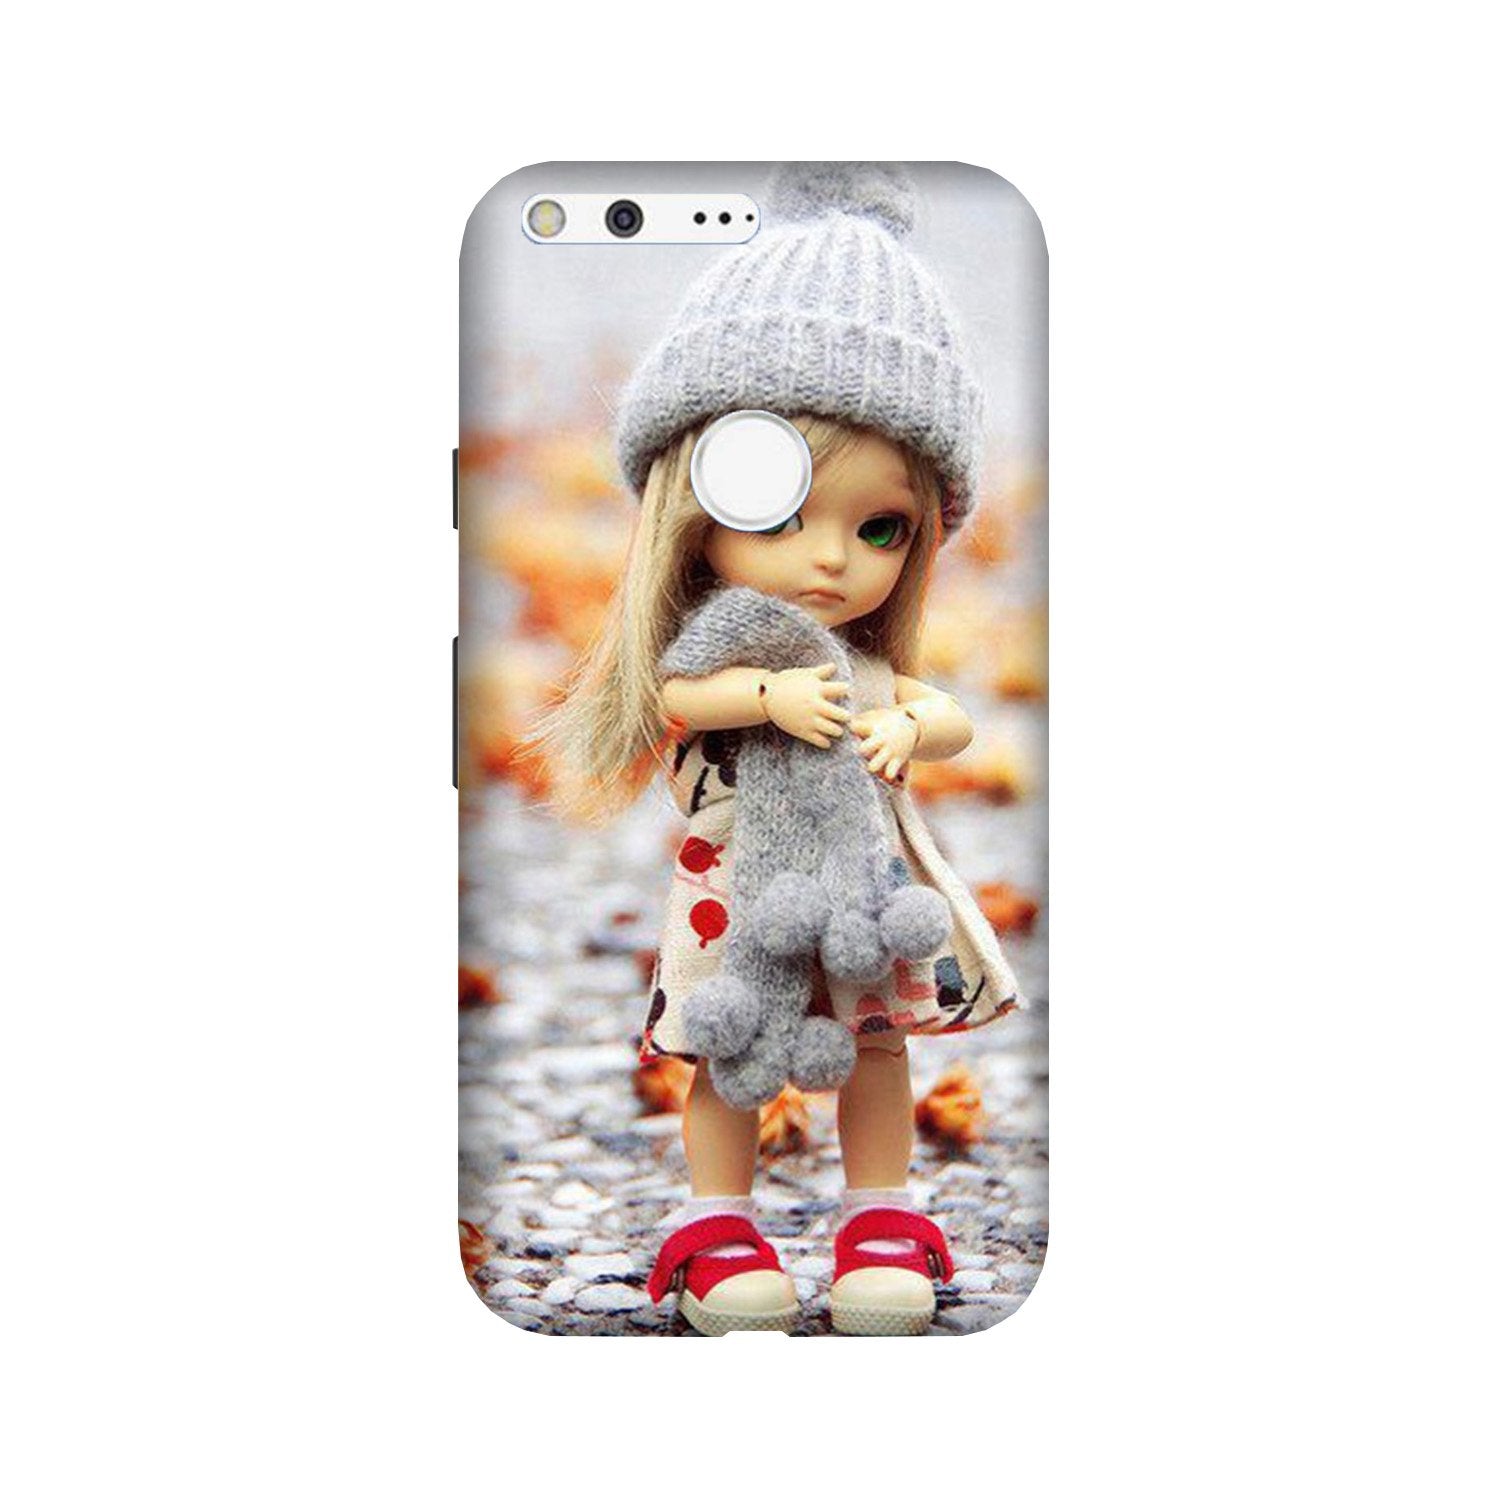 Cute Doll Case for Google Pixel